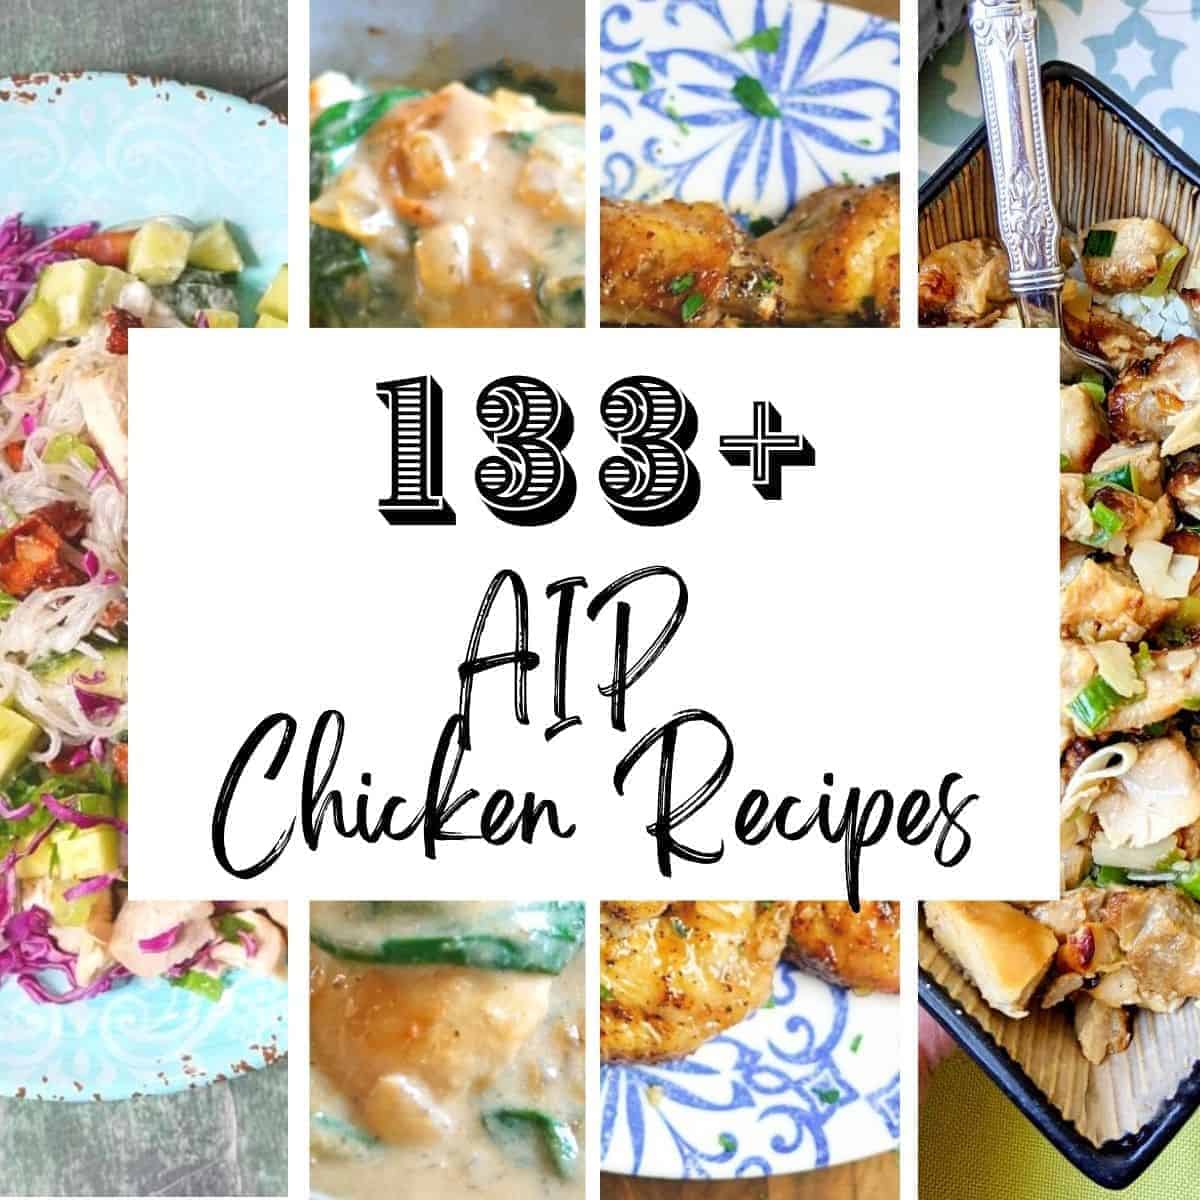 133+ AIP Chicken Recipes to Shake Up Your Routine